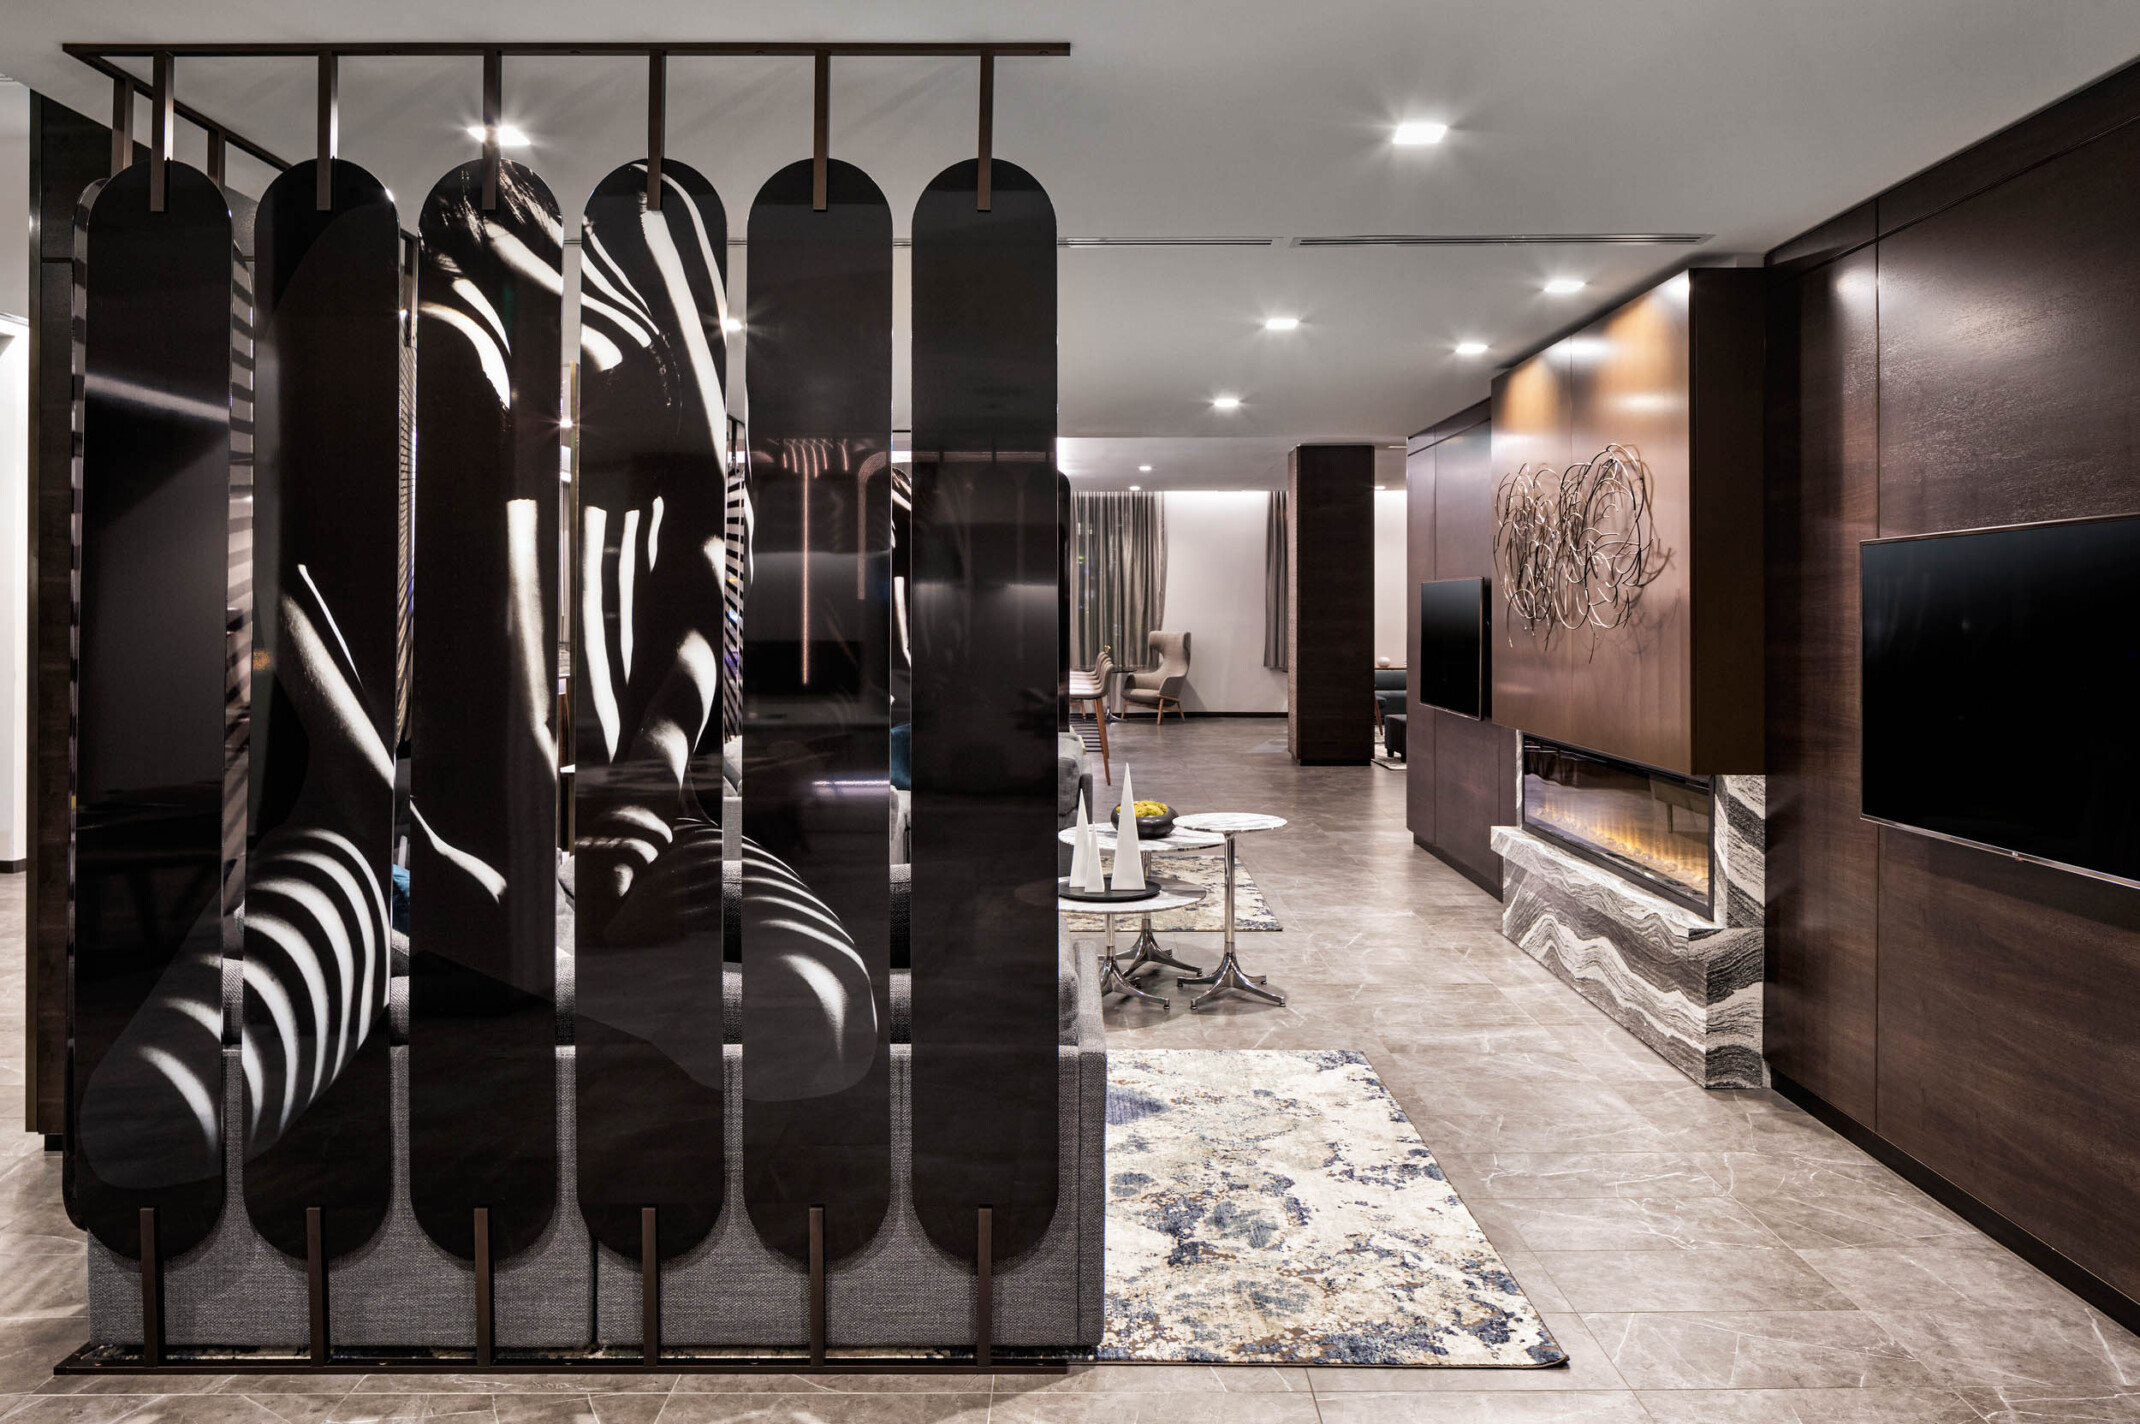 AC Hotels by Marriott features a sculptural divider in a monochromatic lobby with wood panel wall and fireplace